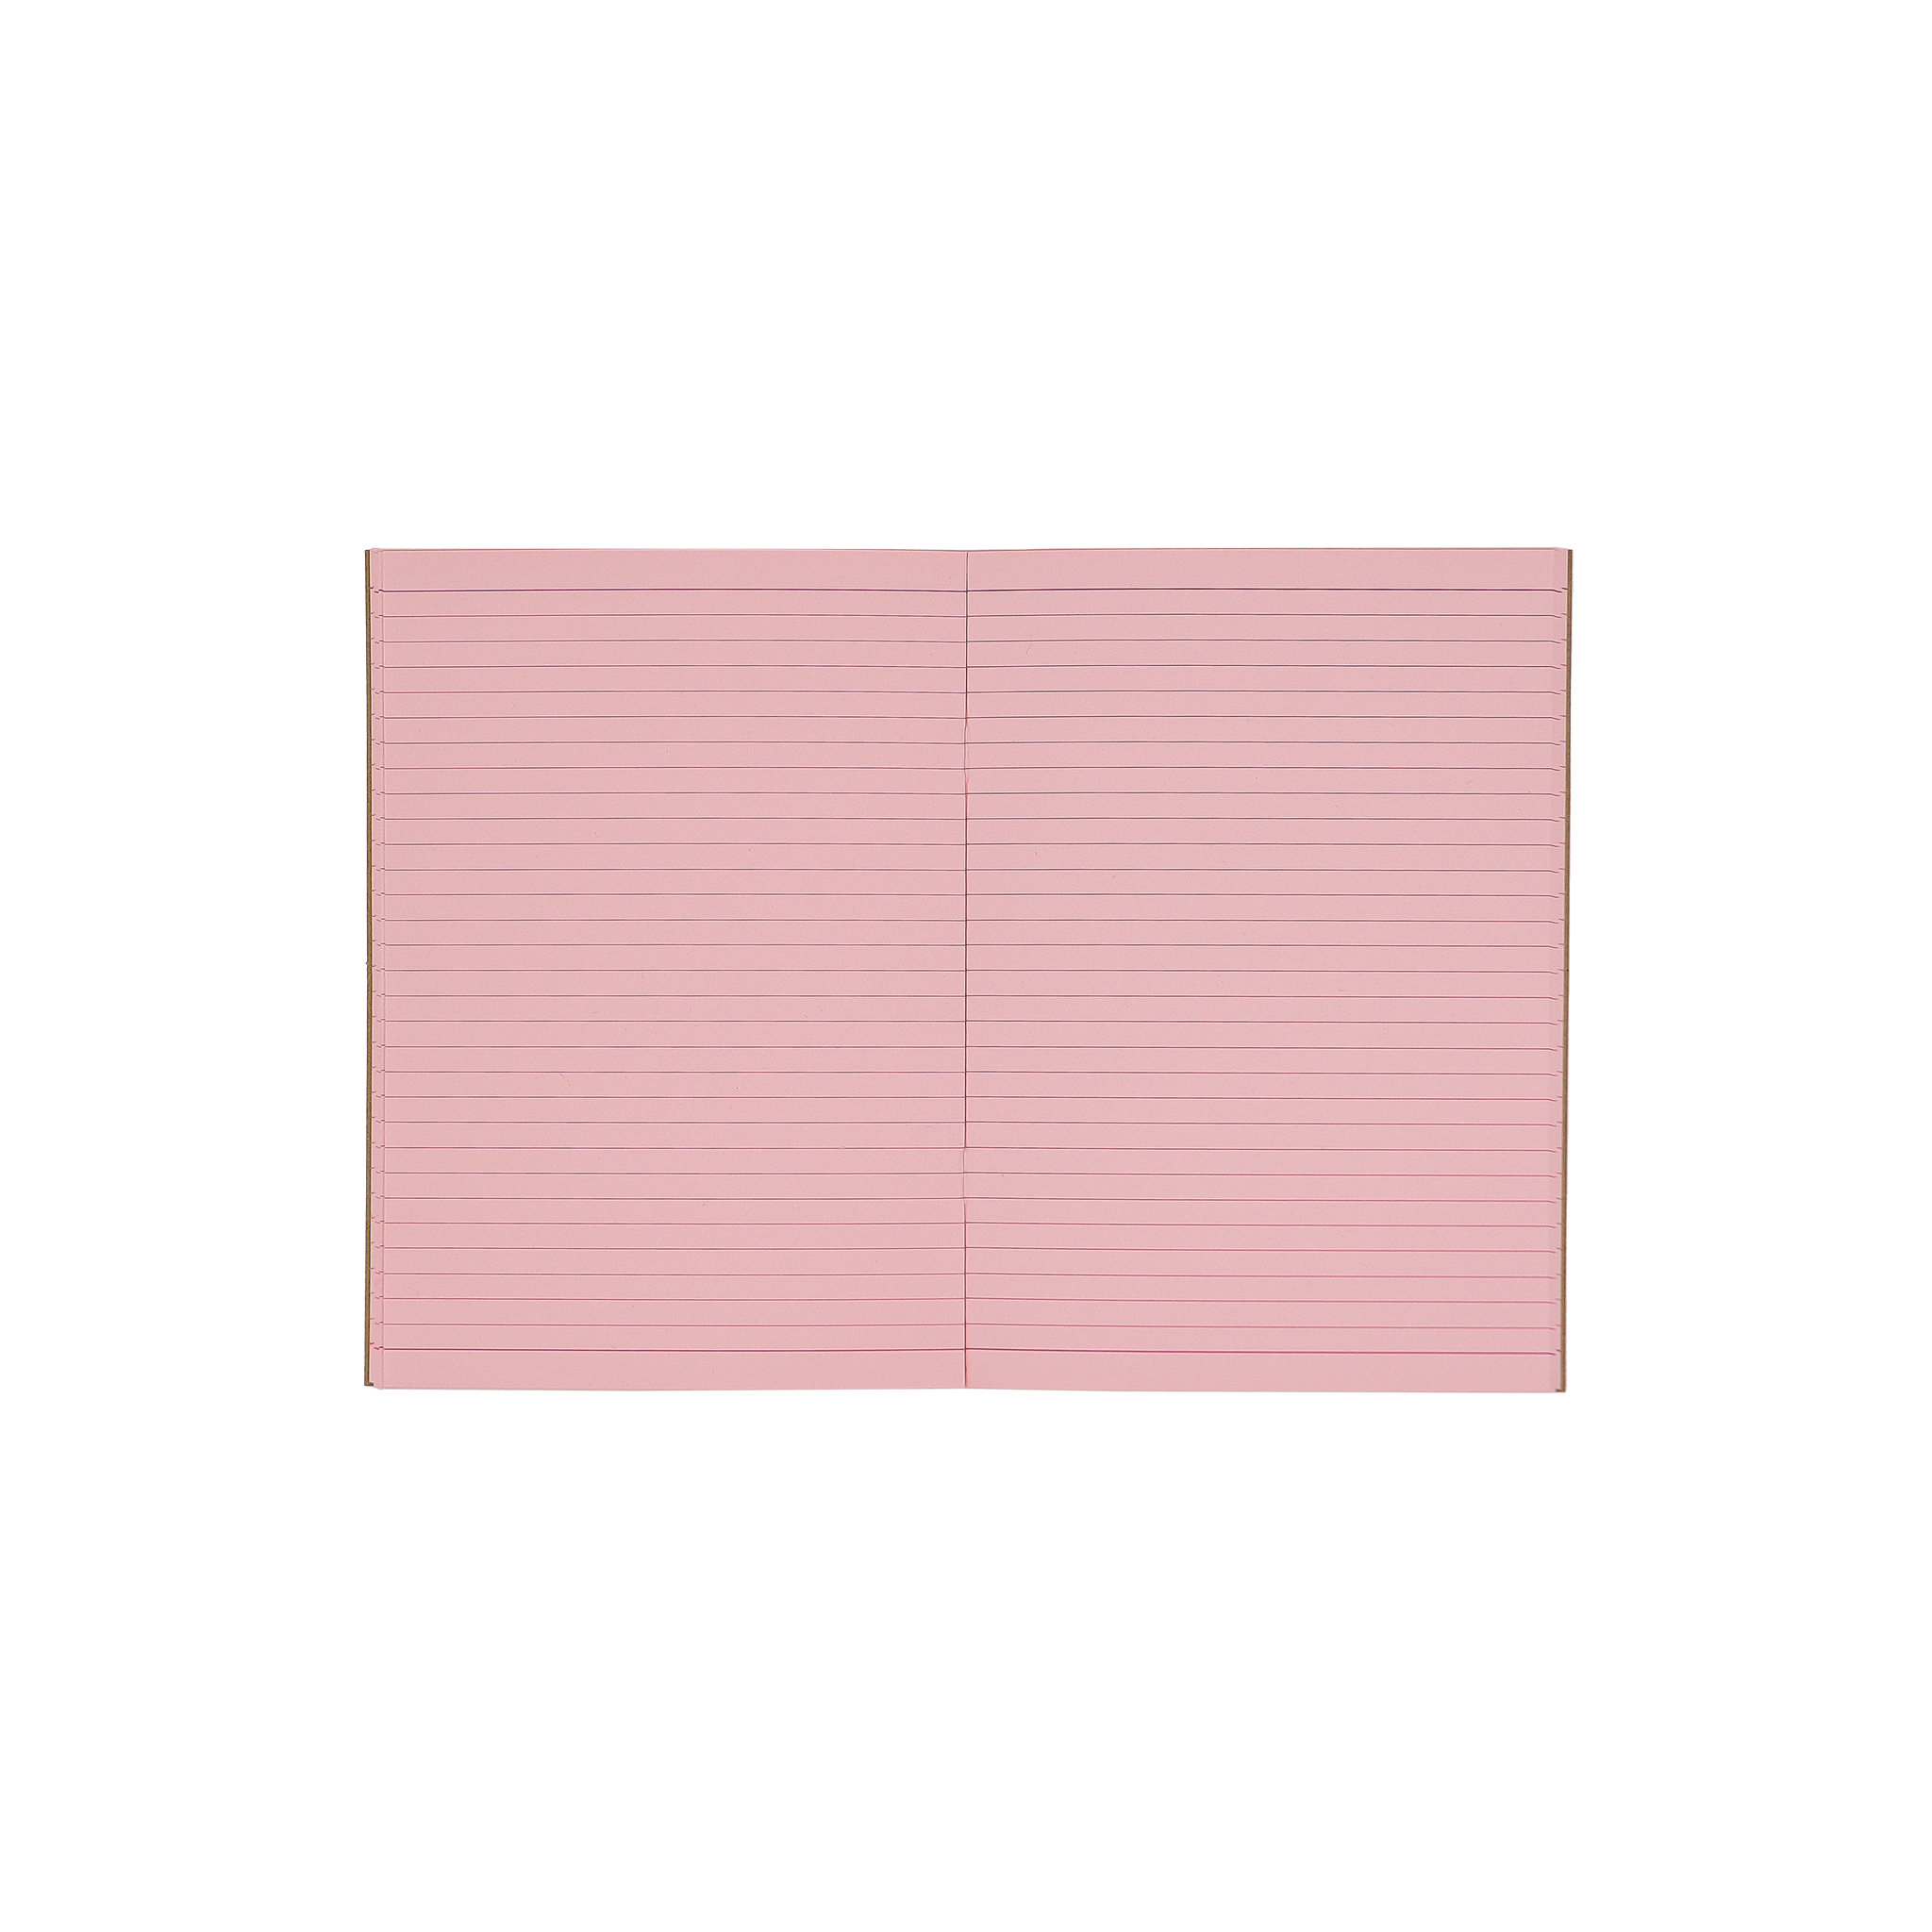 Socolo notebook, open showing its pink paper pages, lined with pink ink. 